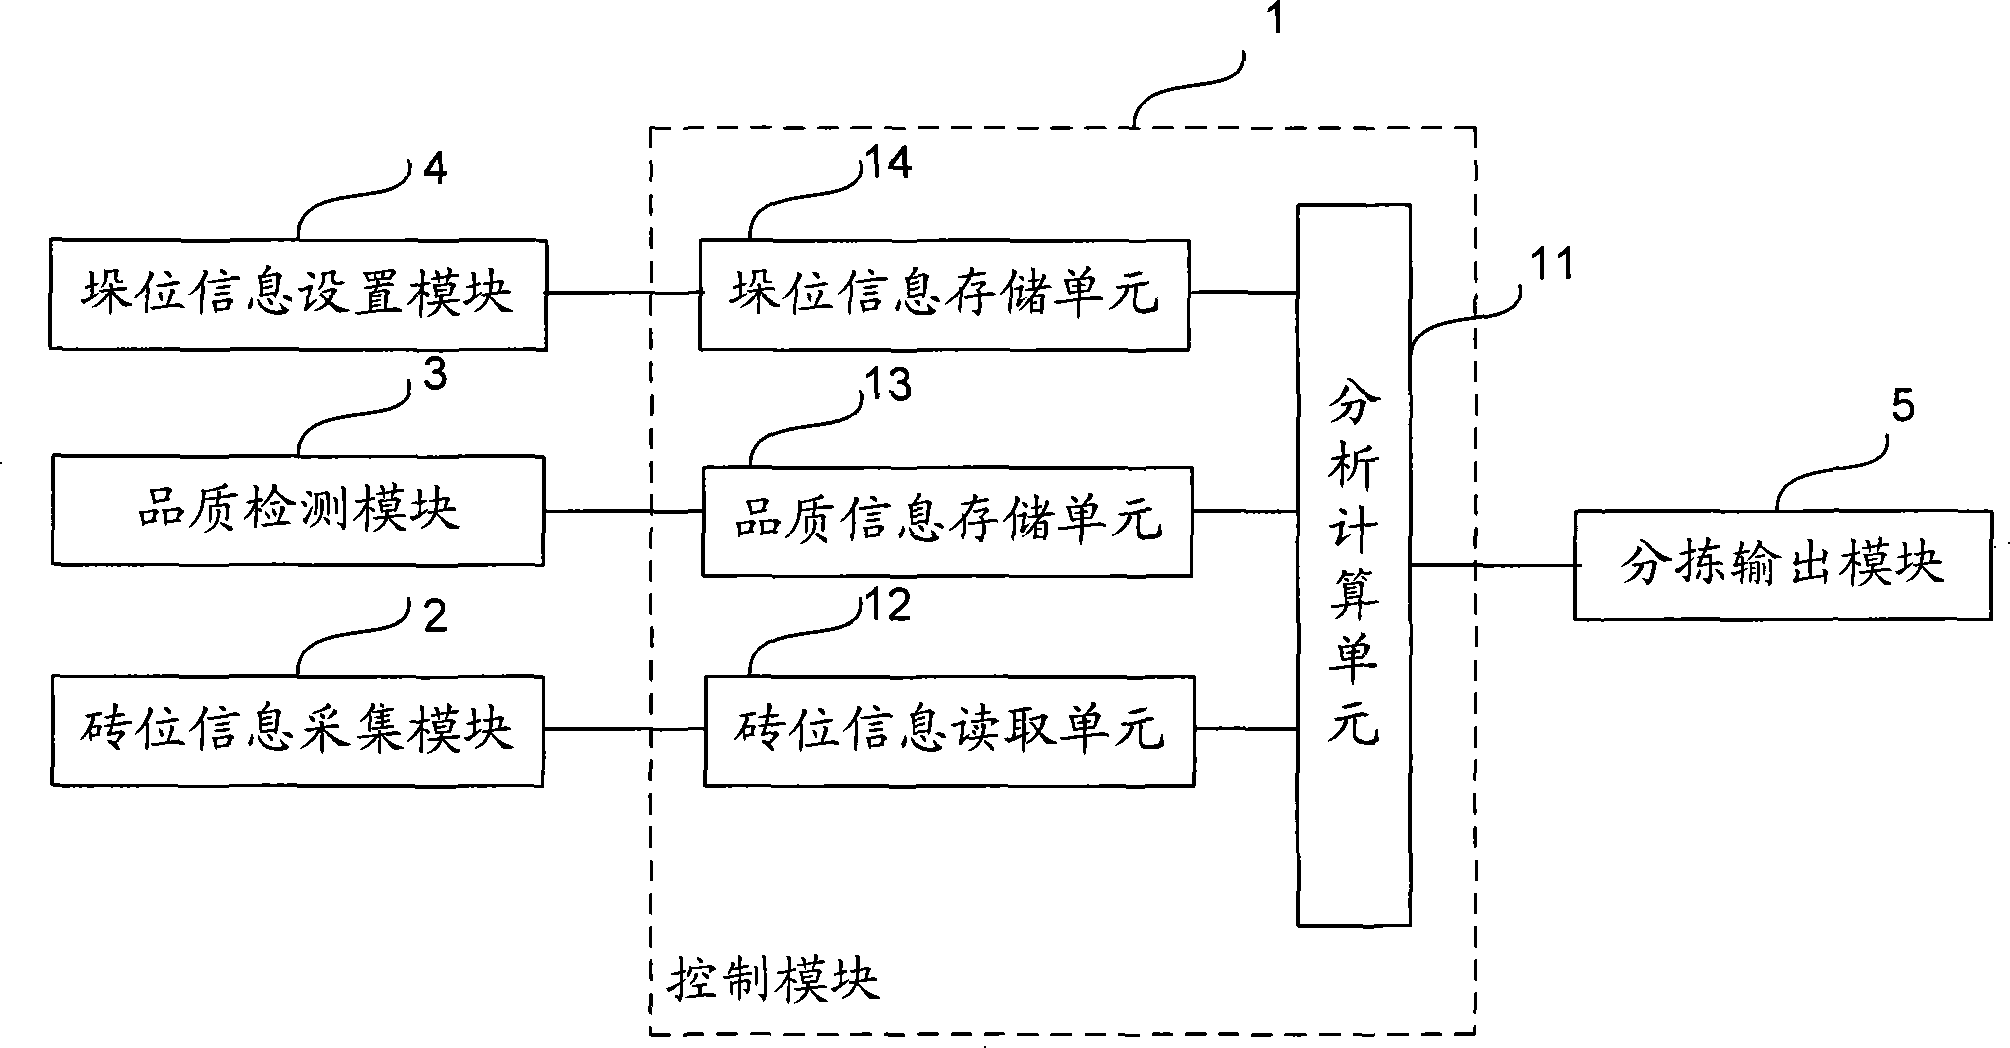 Automatic sorting device, and method and system